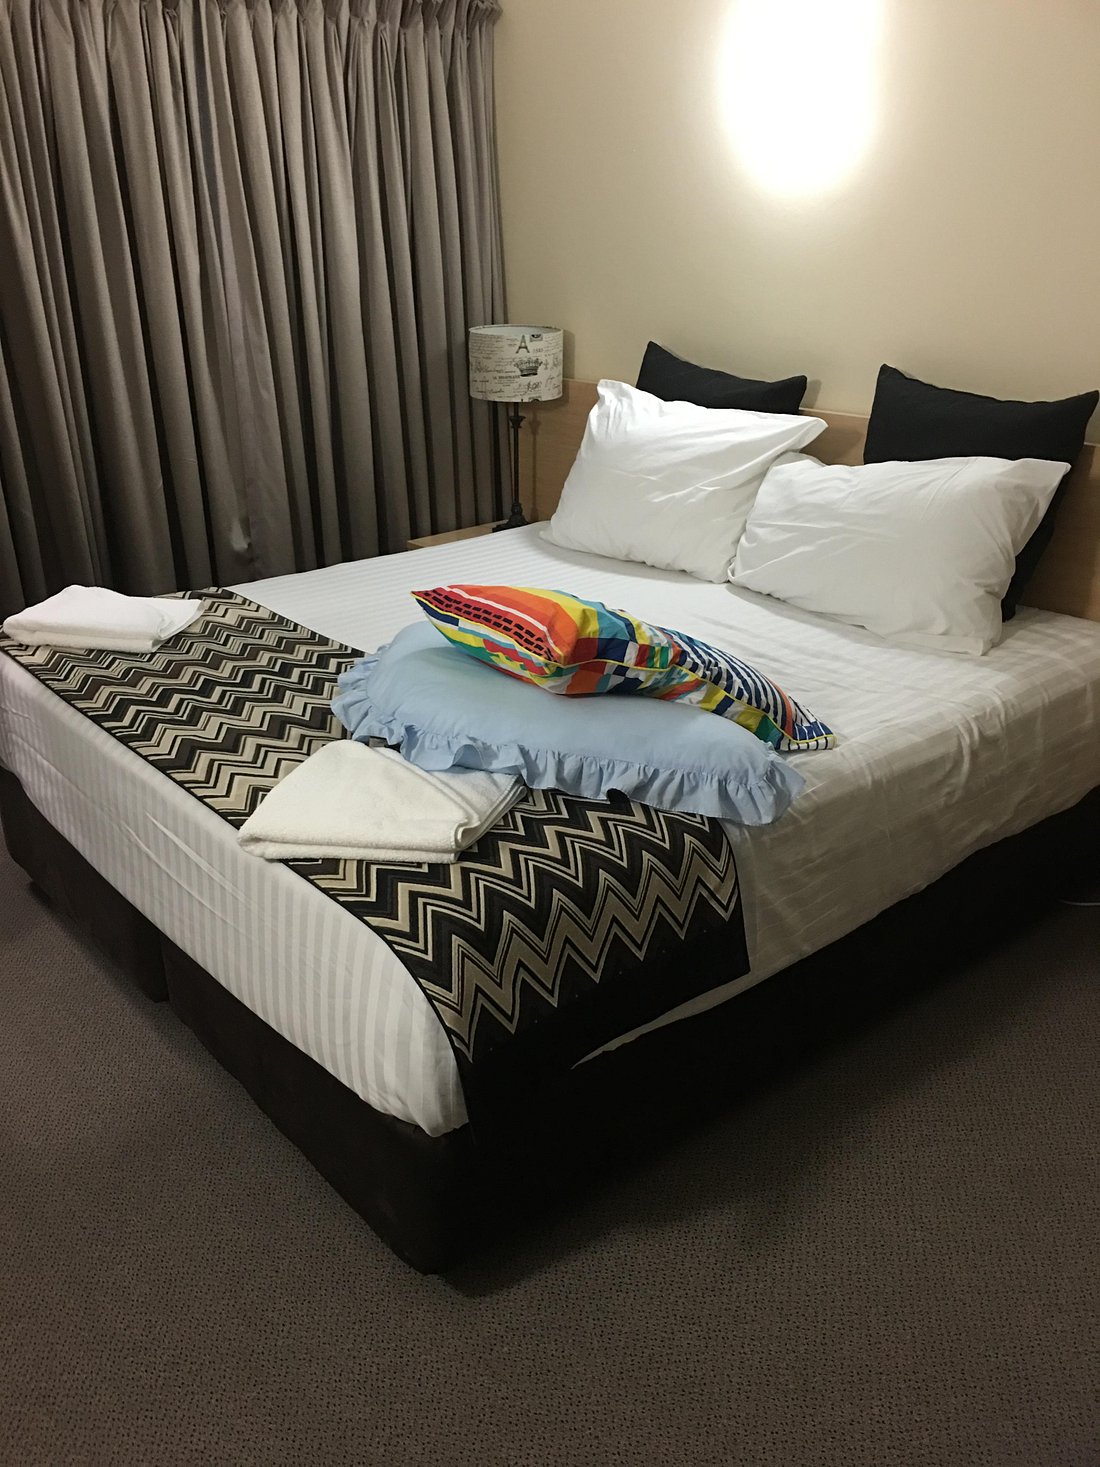 Things To Do in Motel Kempsey, Restaurants in Motel Kempsey